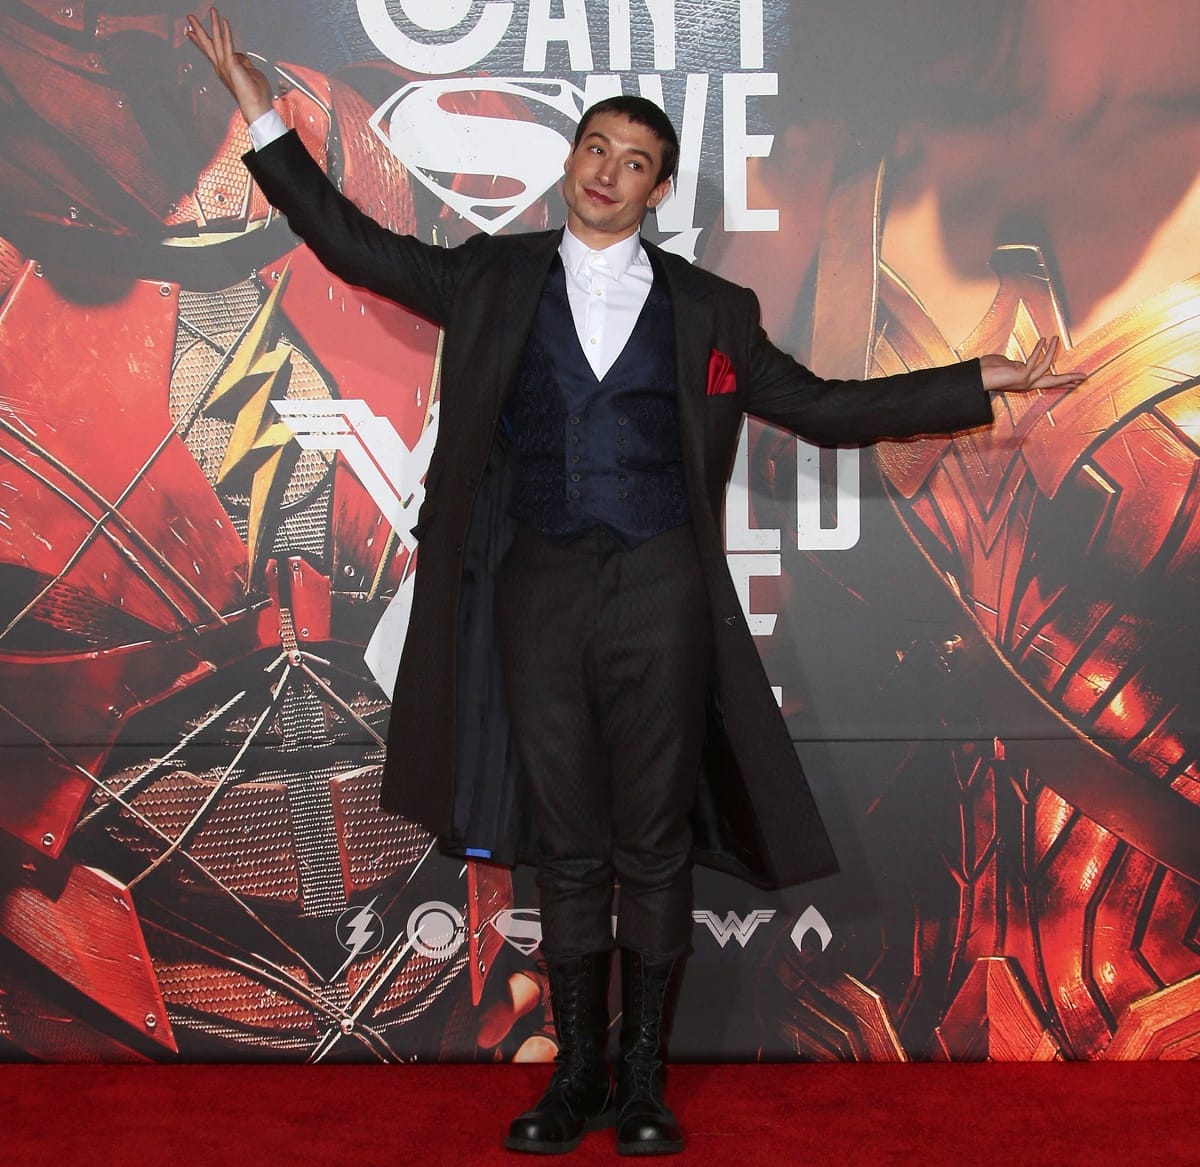 Ezra Miller stepping out on the red carpet for the world premiere of Justice League